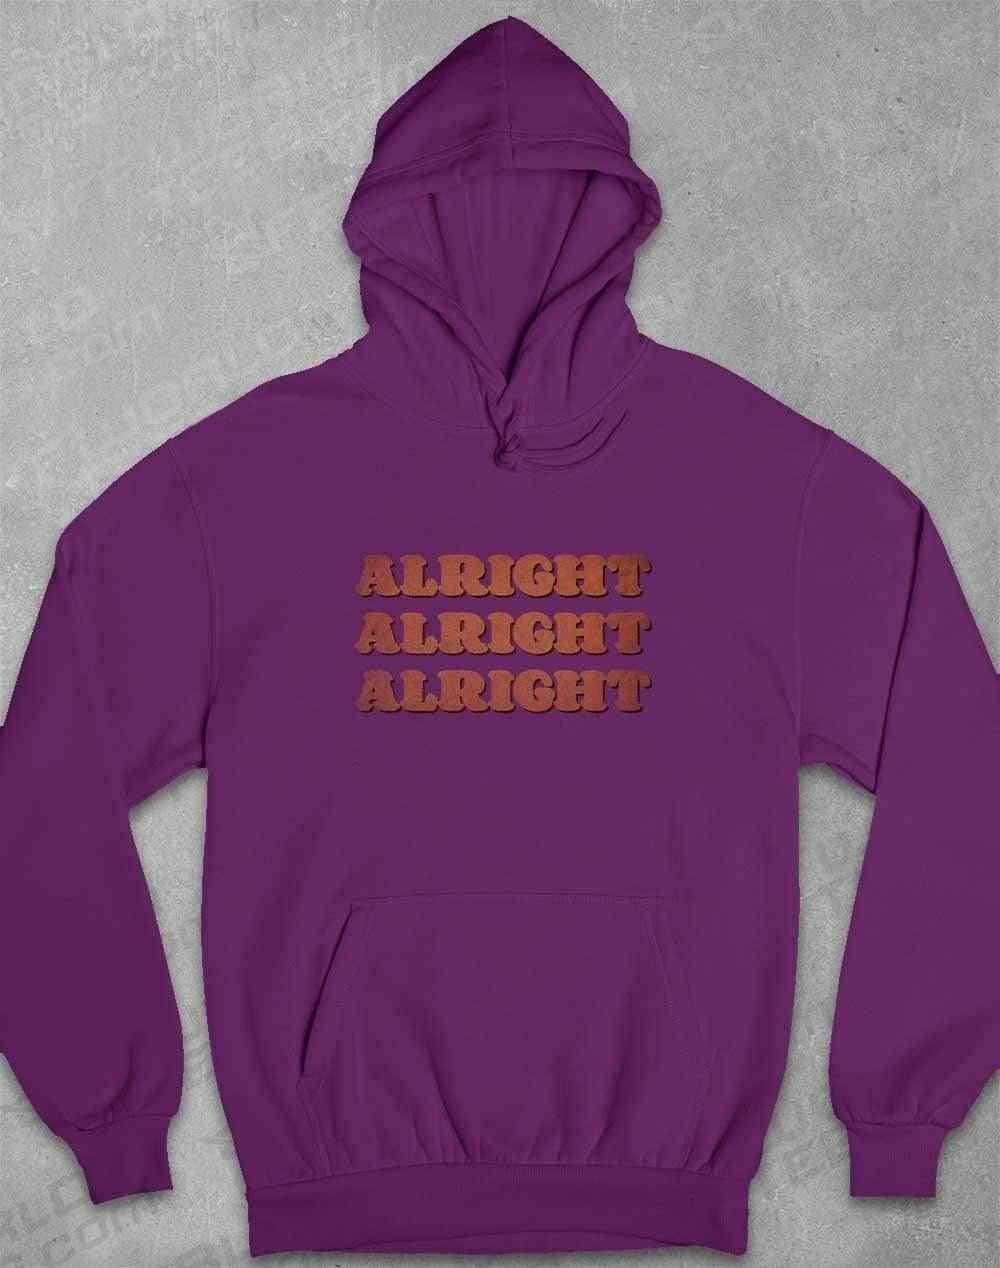 Alright Alright Alright Hoodie XS / Plum  - Off World Tees